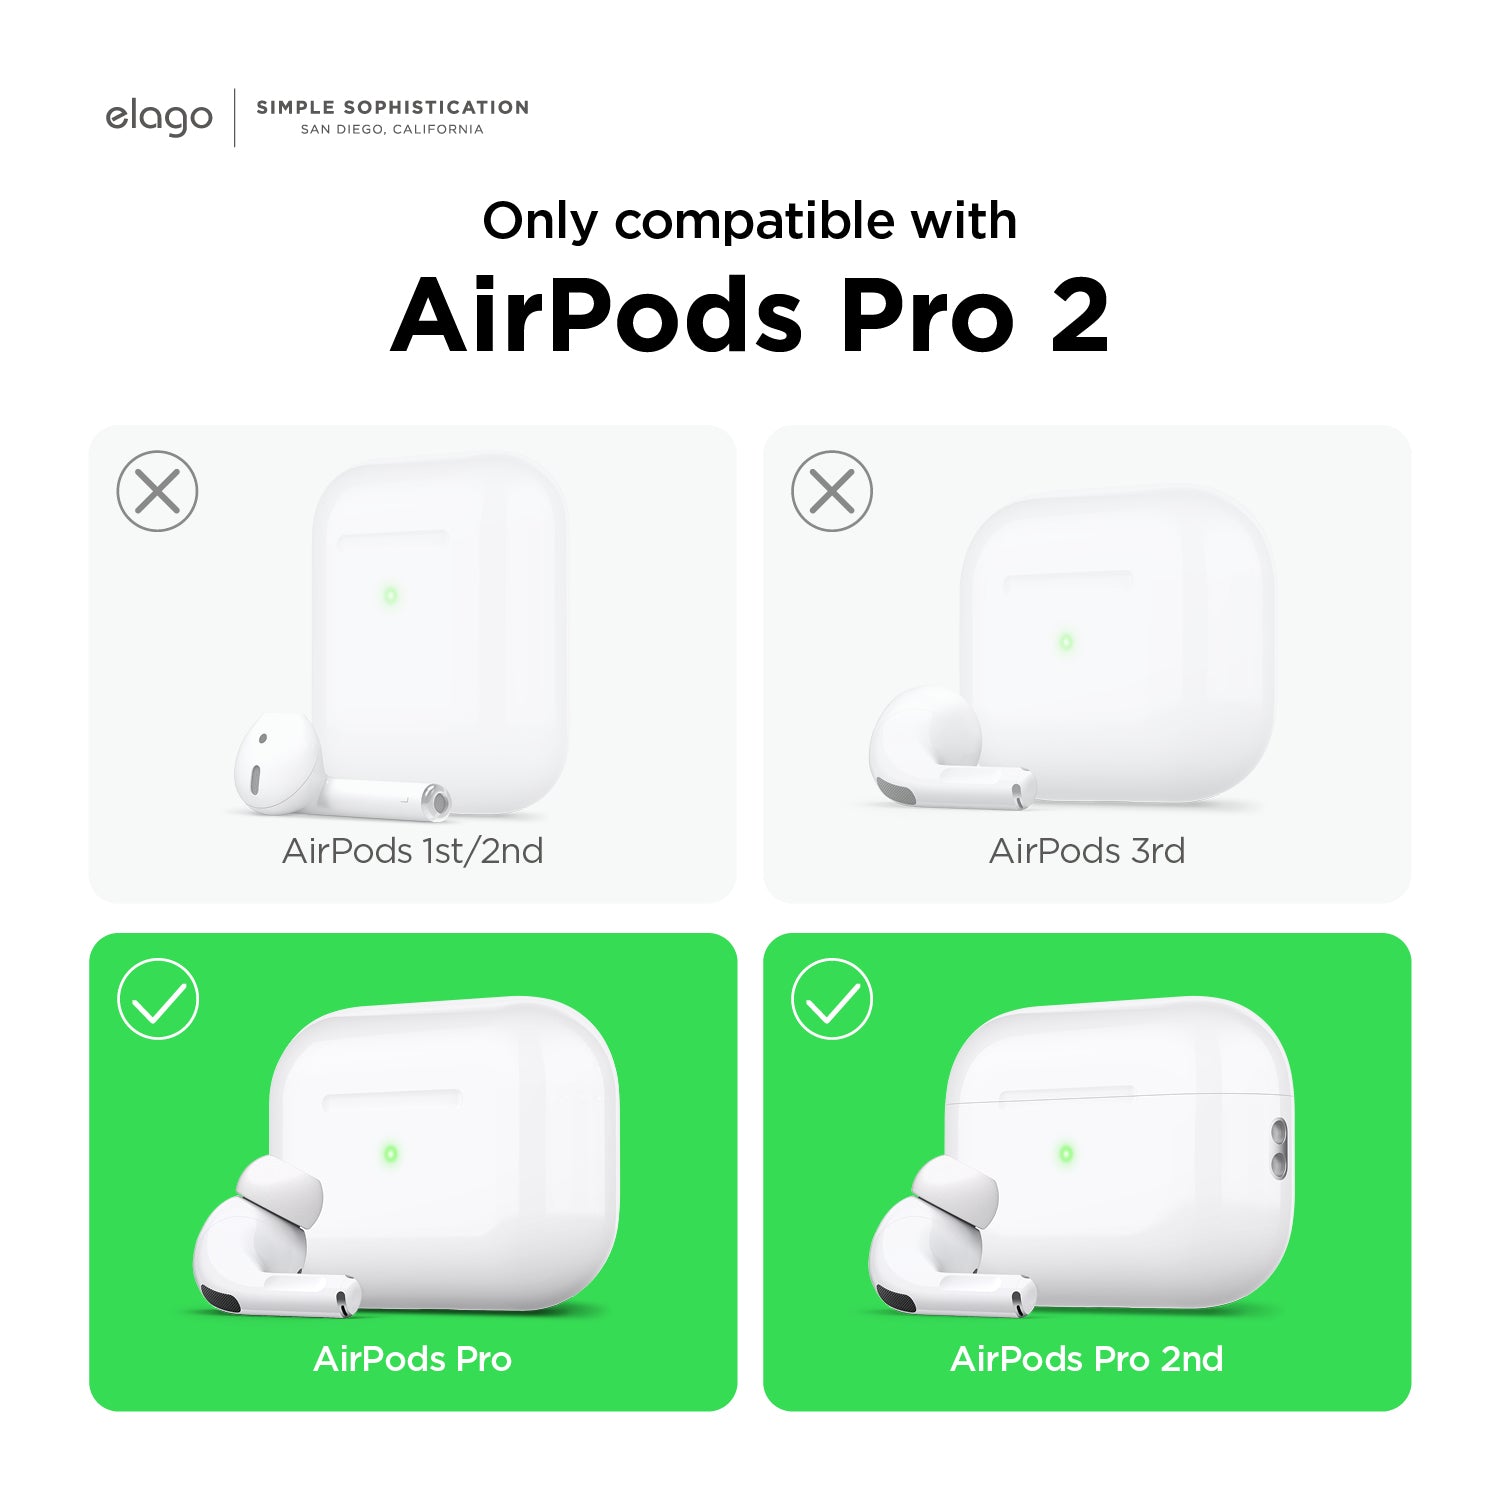 Woolnut Leather Case for AirPods Pro 2nd Gen - Grey